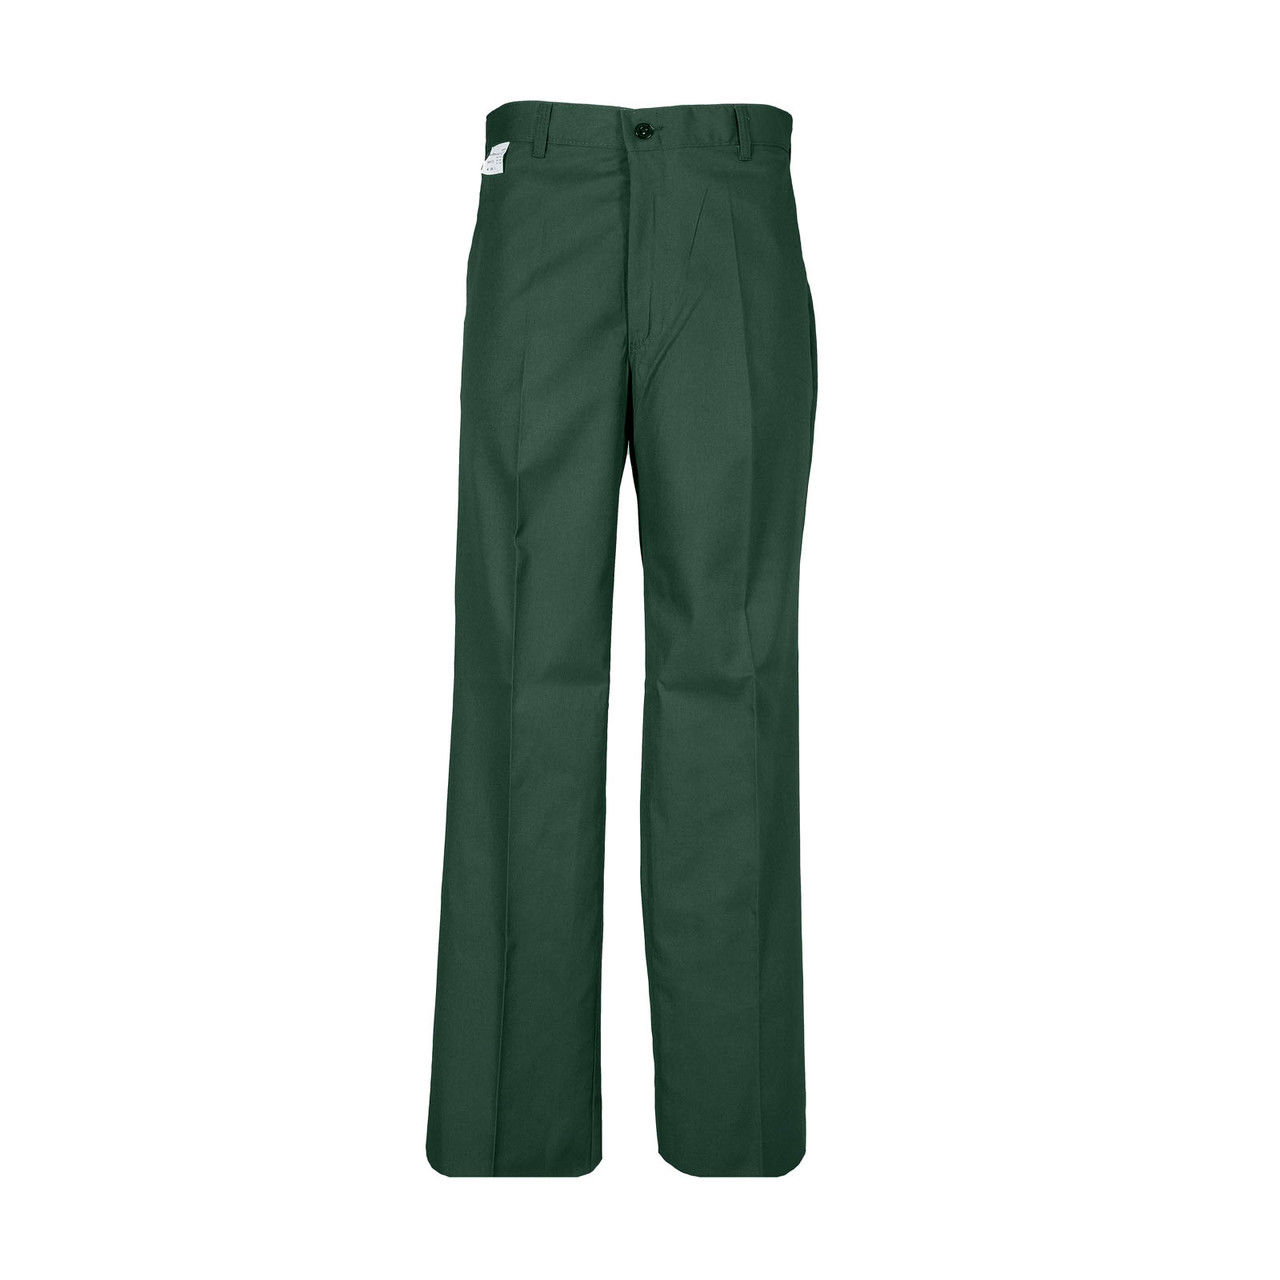 What color are these green work pants?